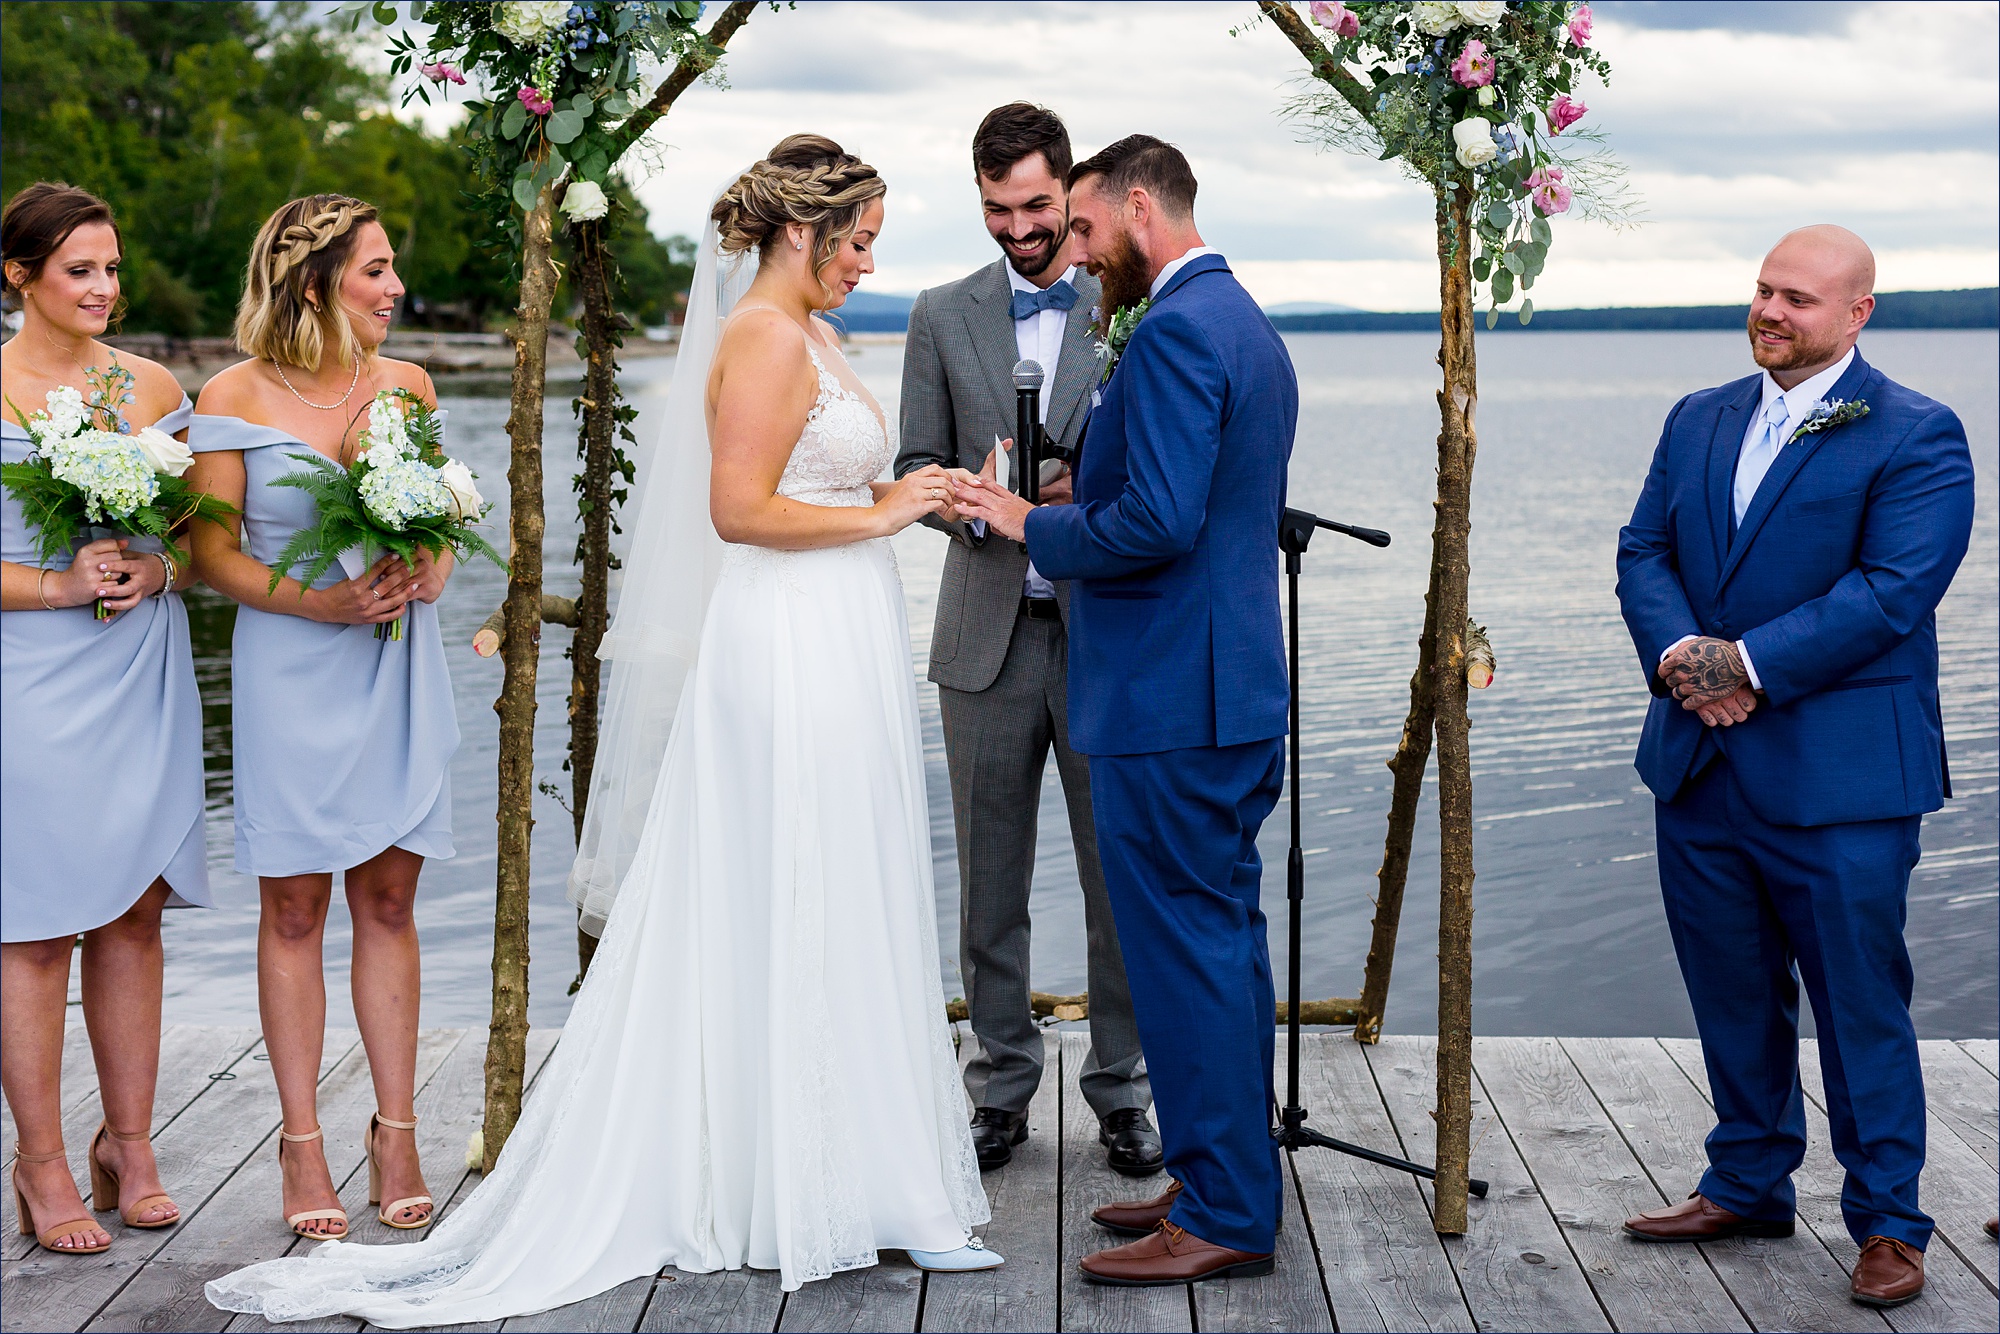 The bride and groom have their ceremony out on a dock overlooking a Maine lake and mountains